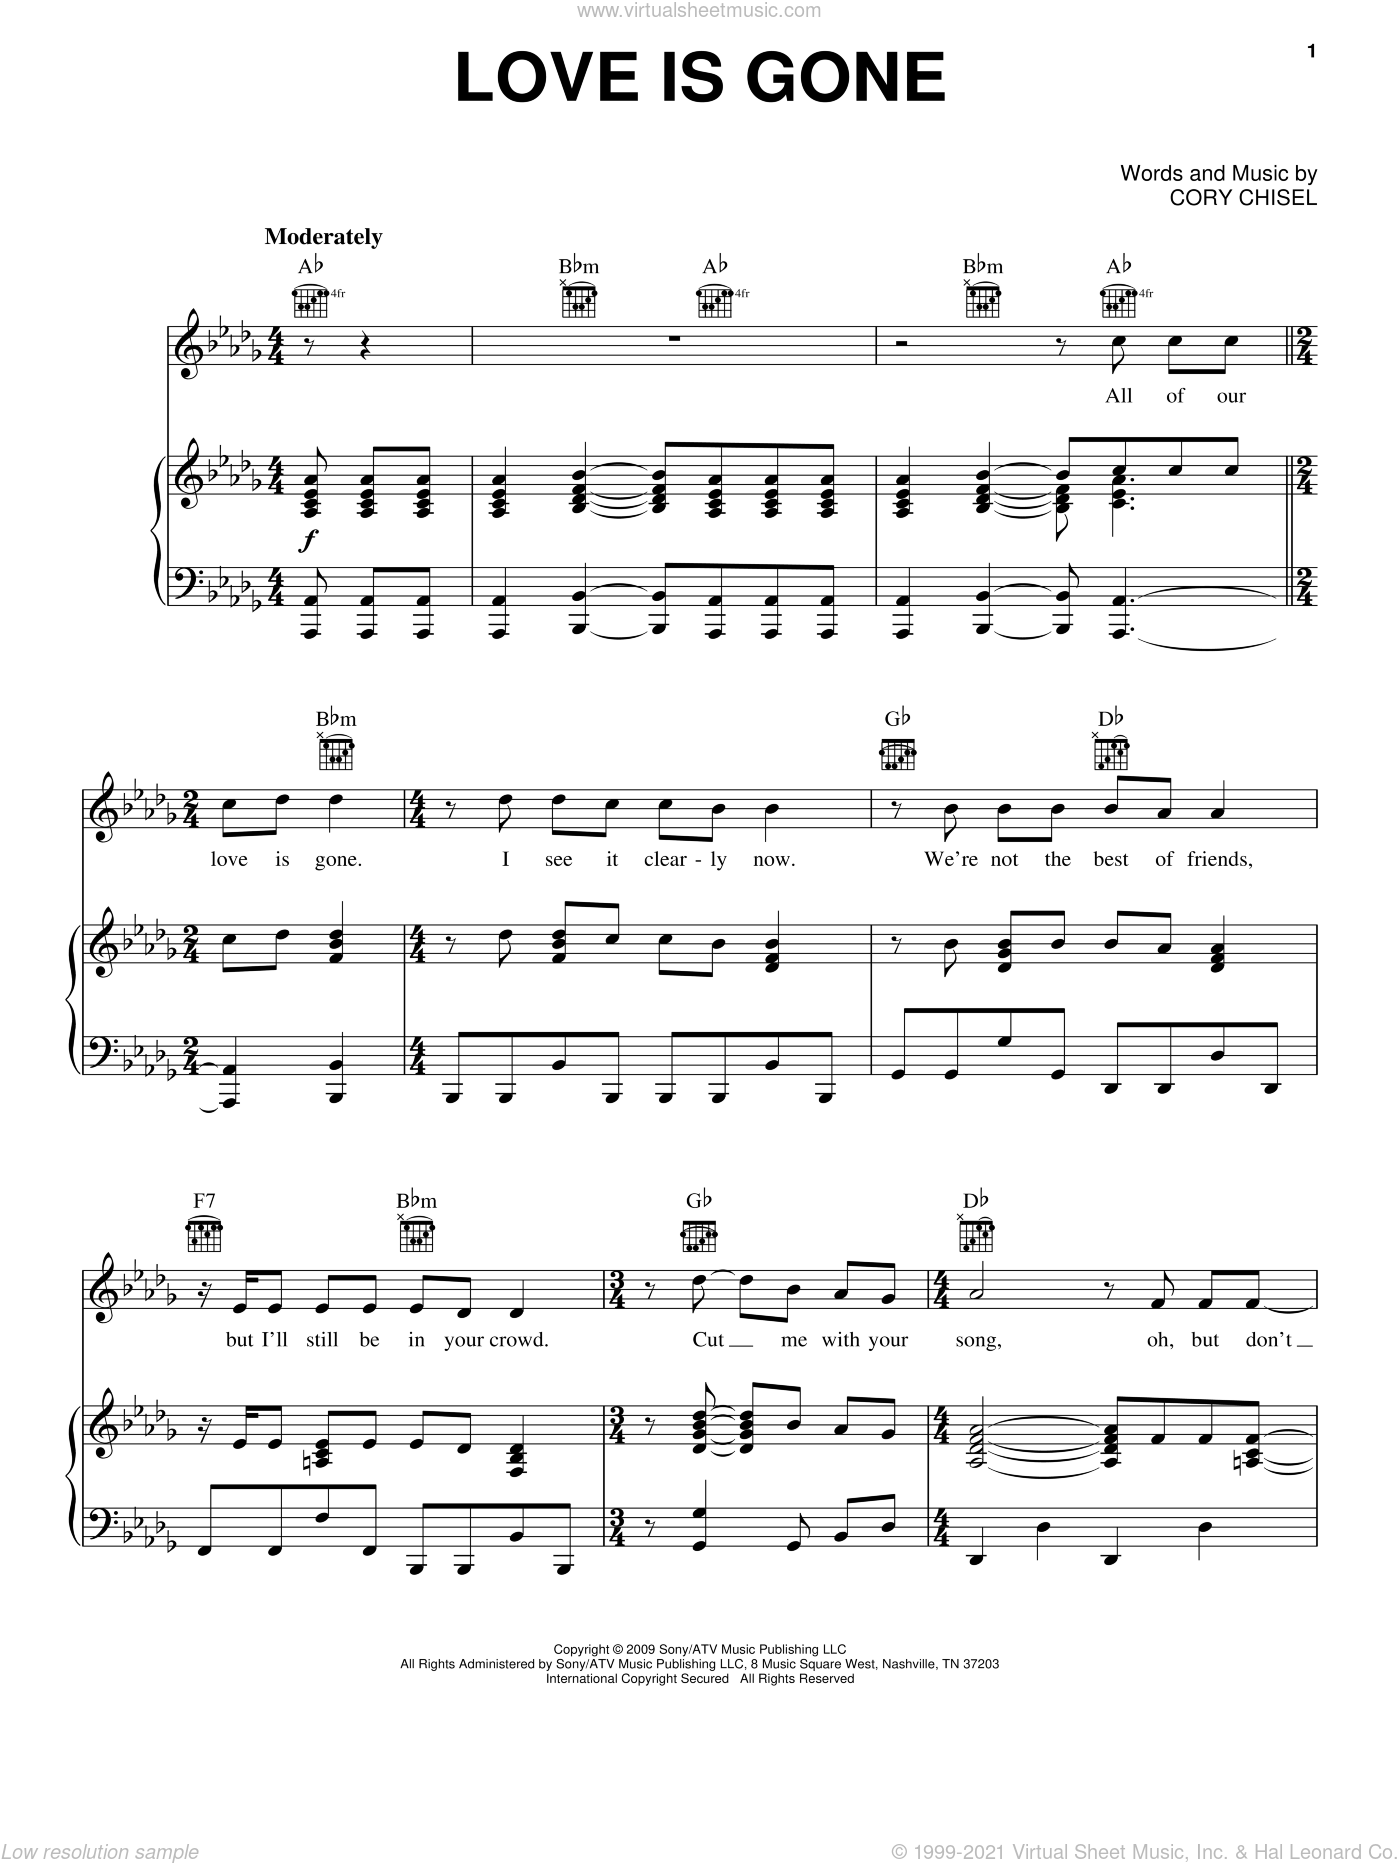 Sons Love Is Gone Sheet Music For Voice Piano Or Guitar Pdf Don't go tonight stay here one more time remind me what it's like and let's fall in love, one more time i need you now, by my side it tears me up, when you turn me down i'm begging please, just stick around. sons love is gone sheet music for voice piano or guitar pdf